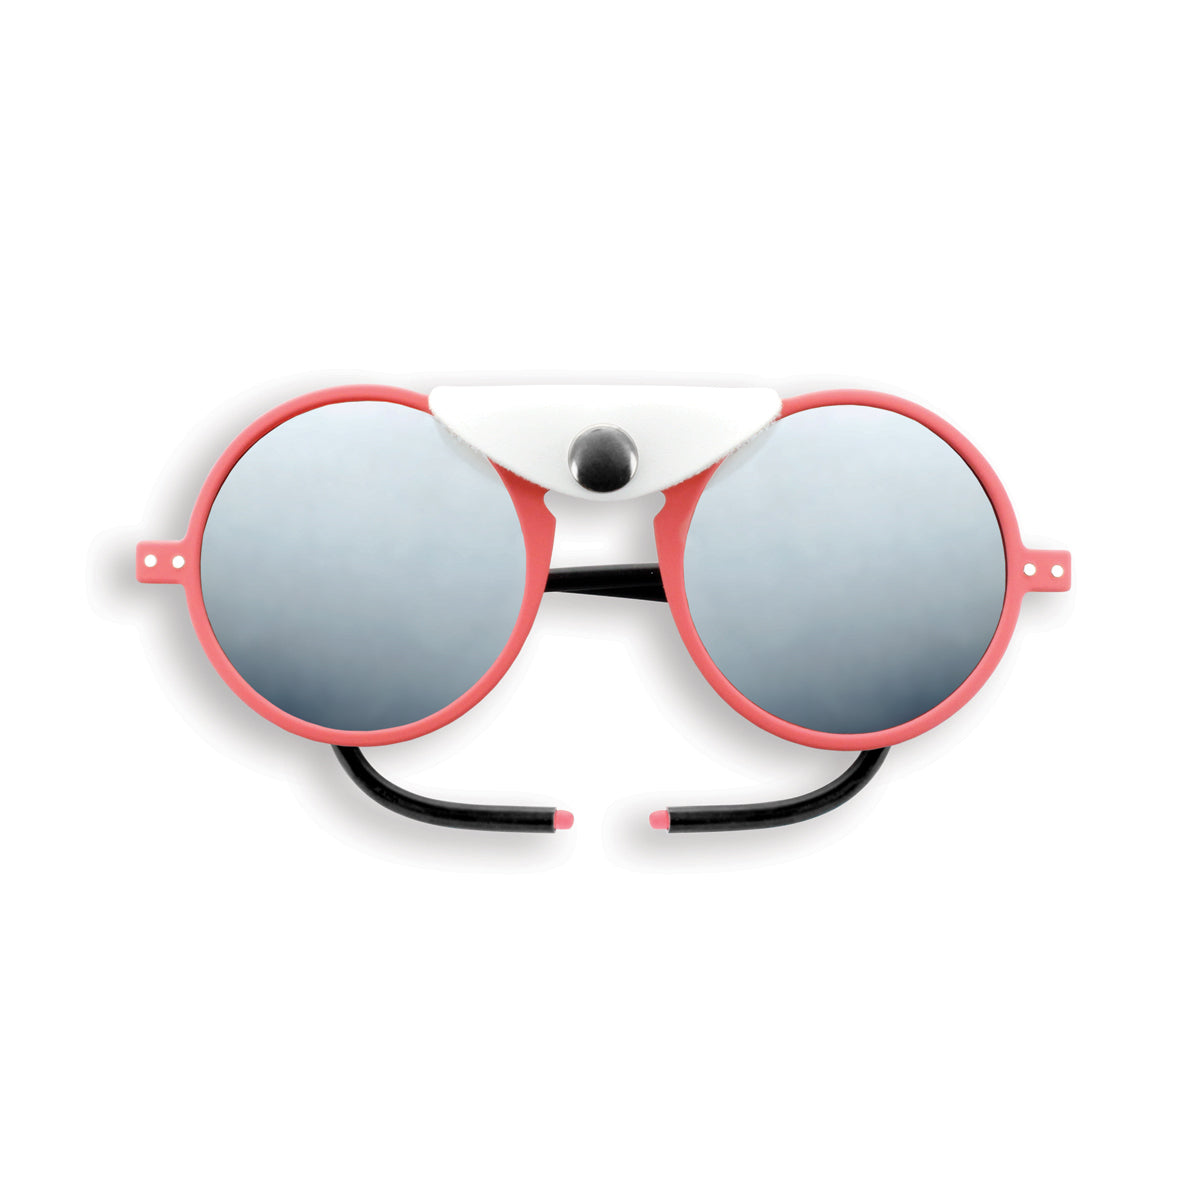 Image of hot pink framed folded sunglasses, with black arms & a leatherette flap across the nose bridge of the glasses & attached with a silver press stud. Set against a white background.